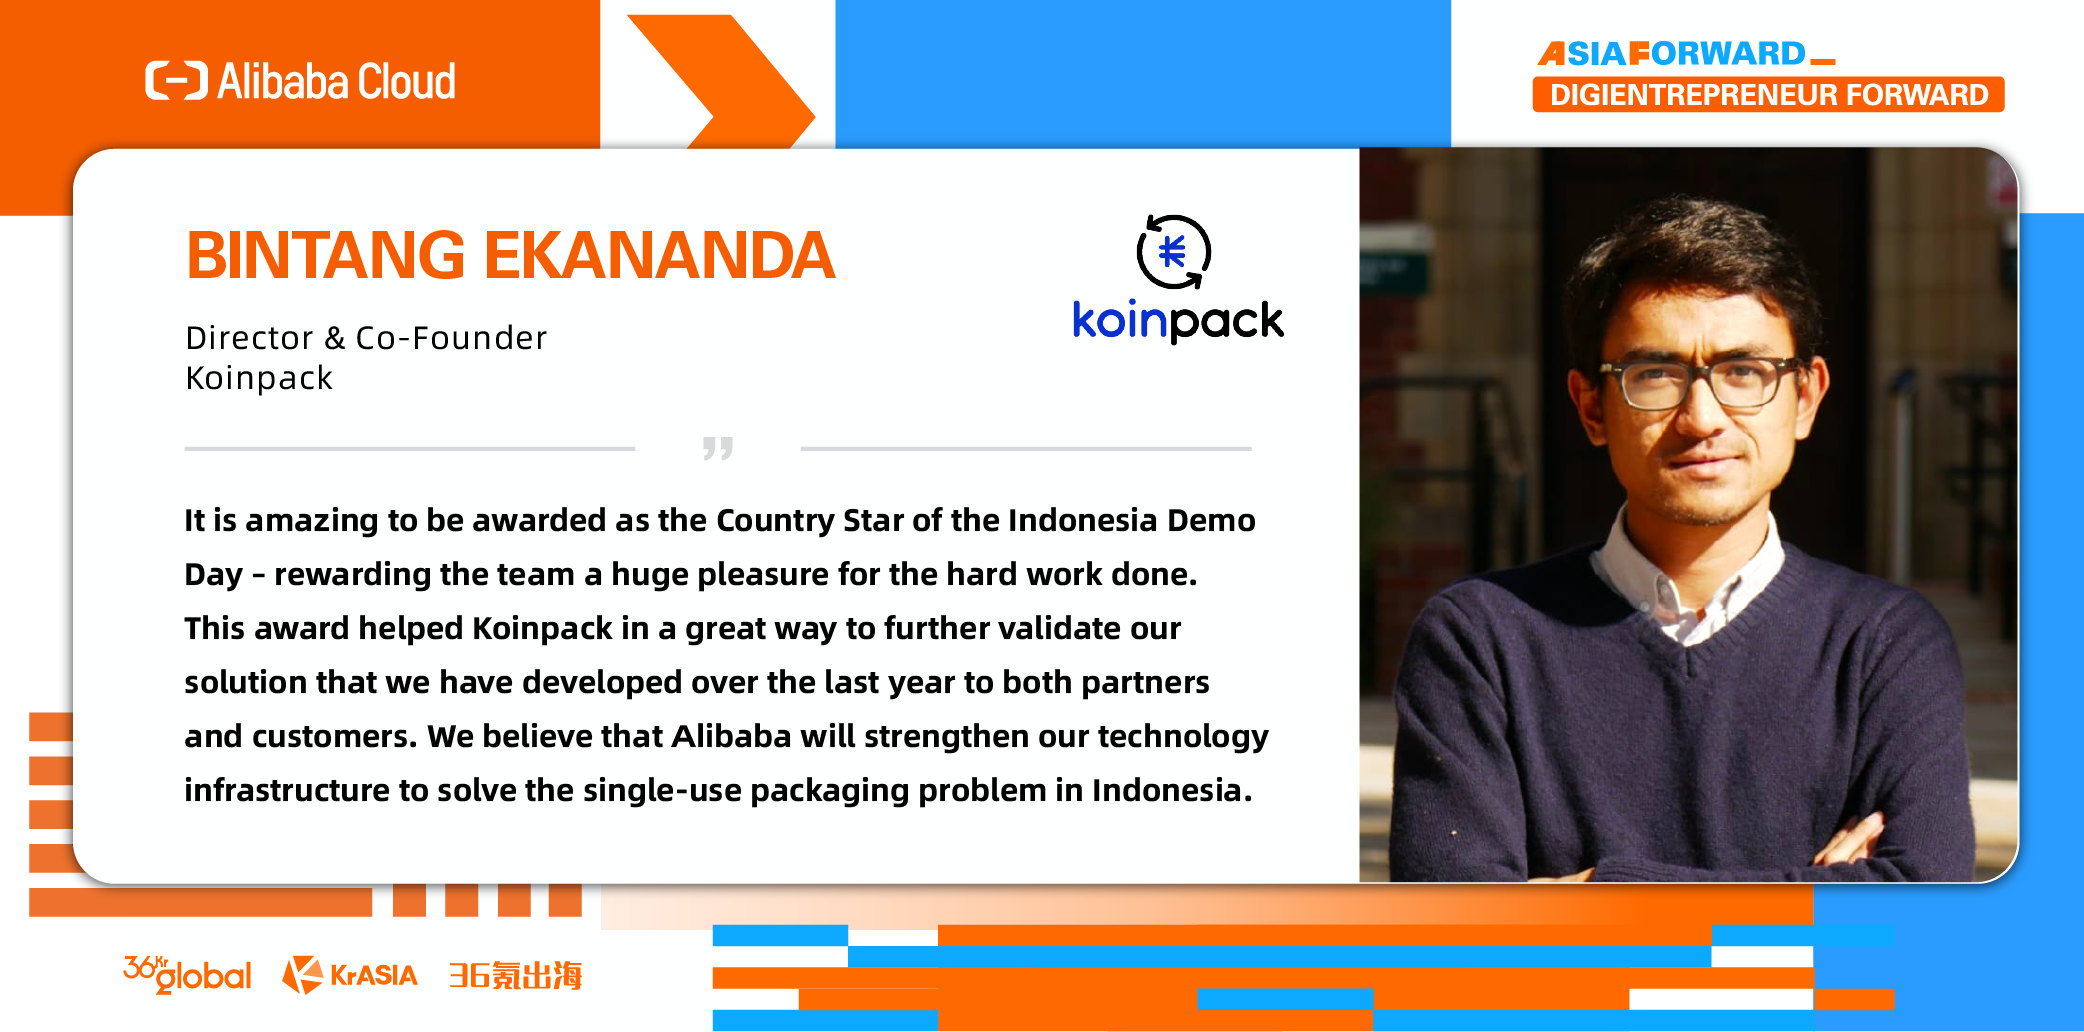 Meet Koinpack, Country Star of the Alibaba Cloud x KrASIA Global Startup Accelerator Indonesia Demo Day